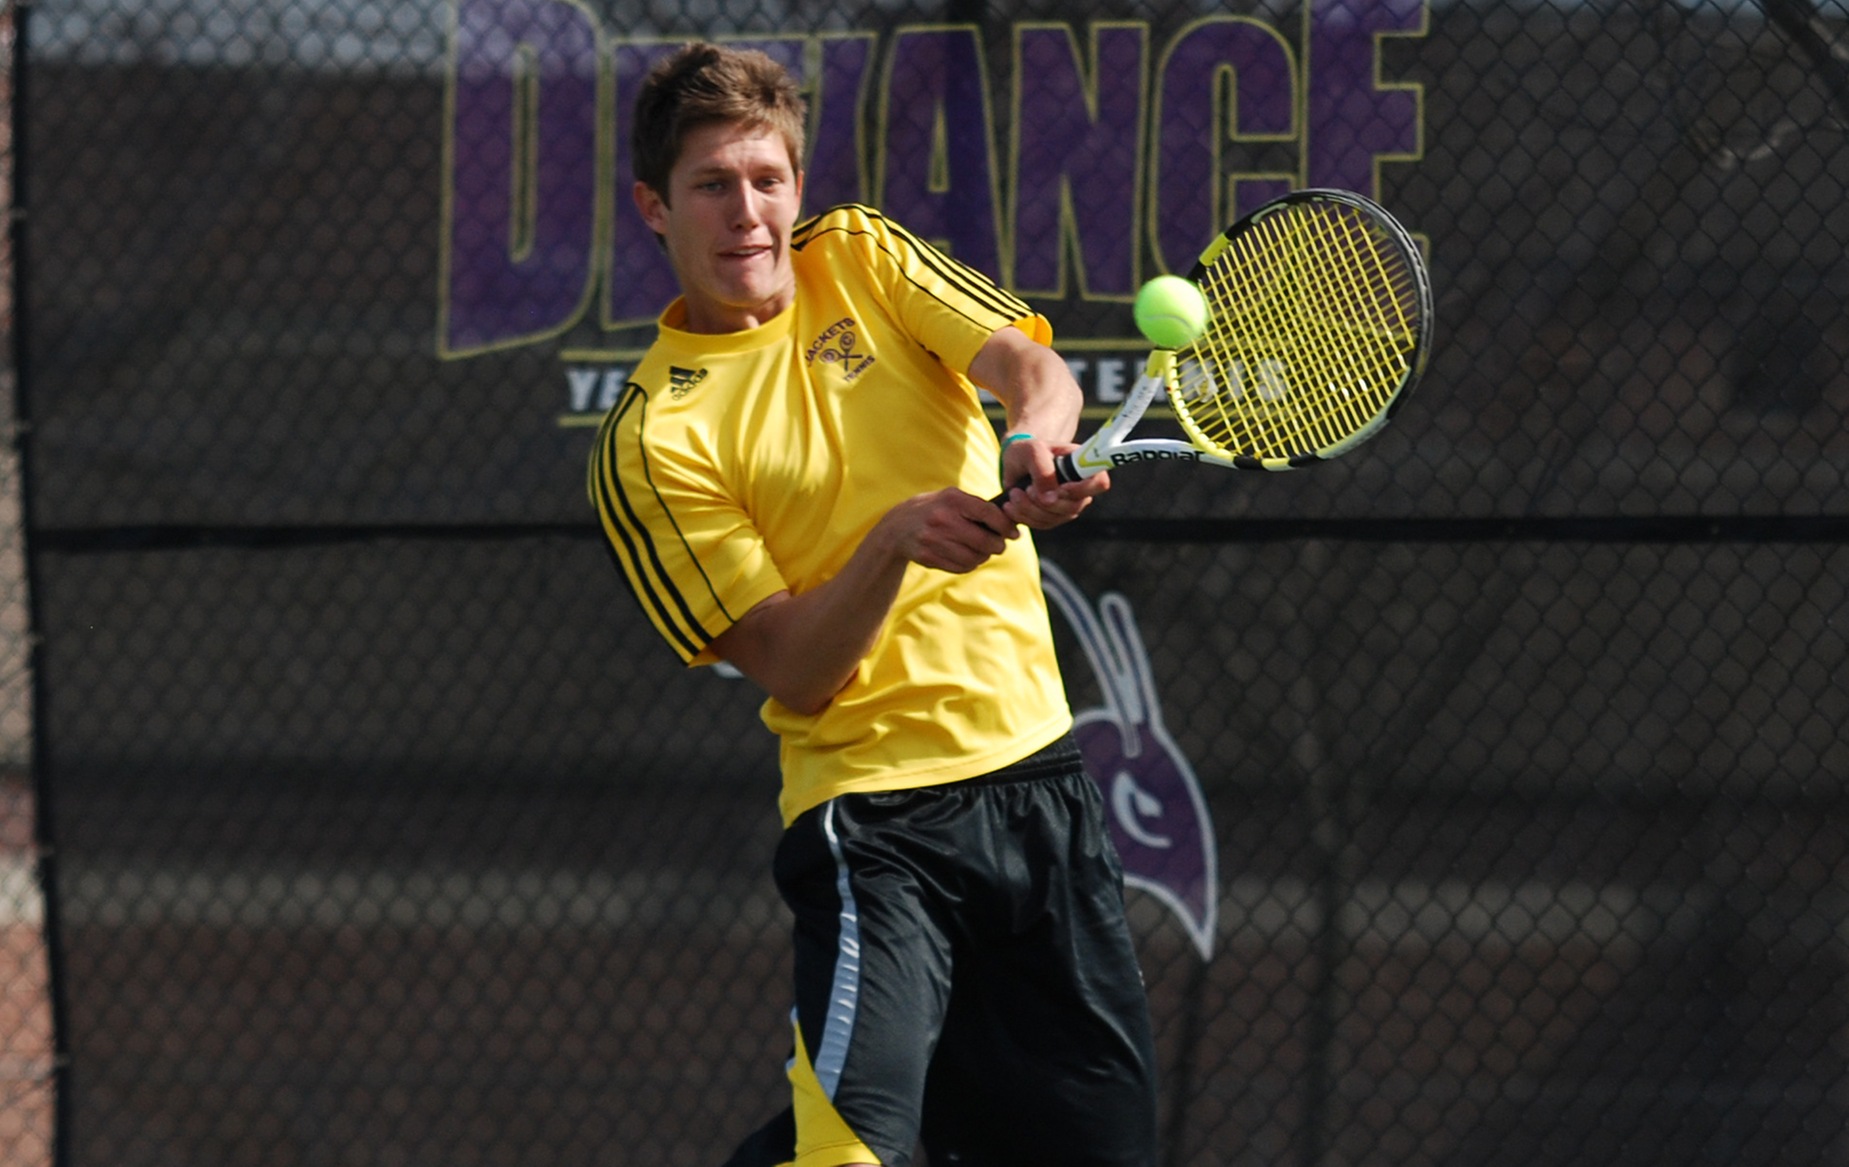 DC’s Ault and Vandevender Earn HCAC Honors